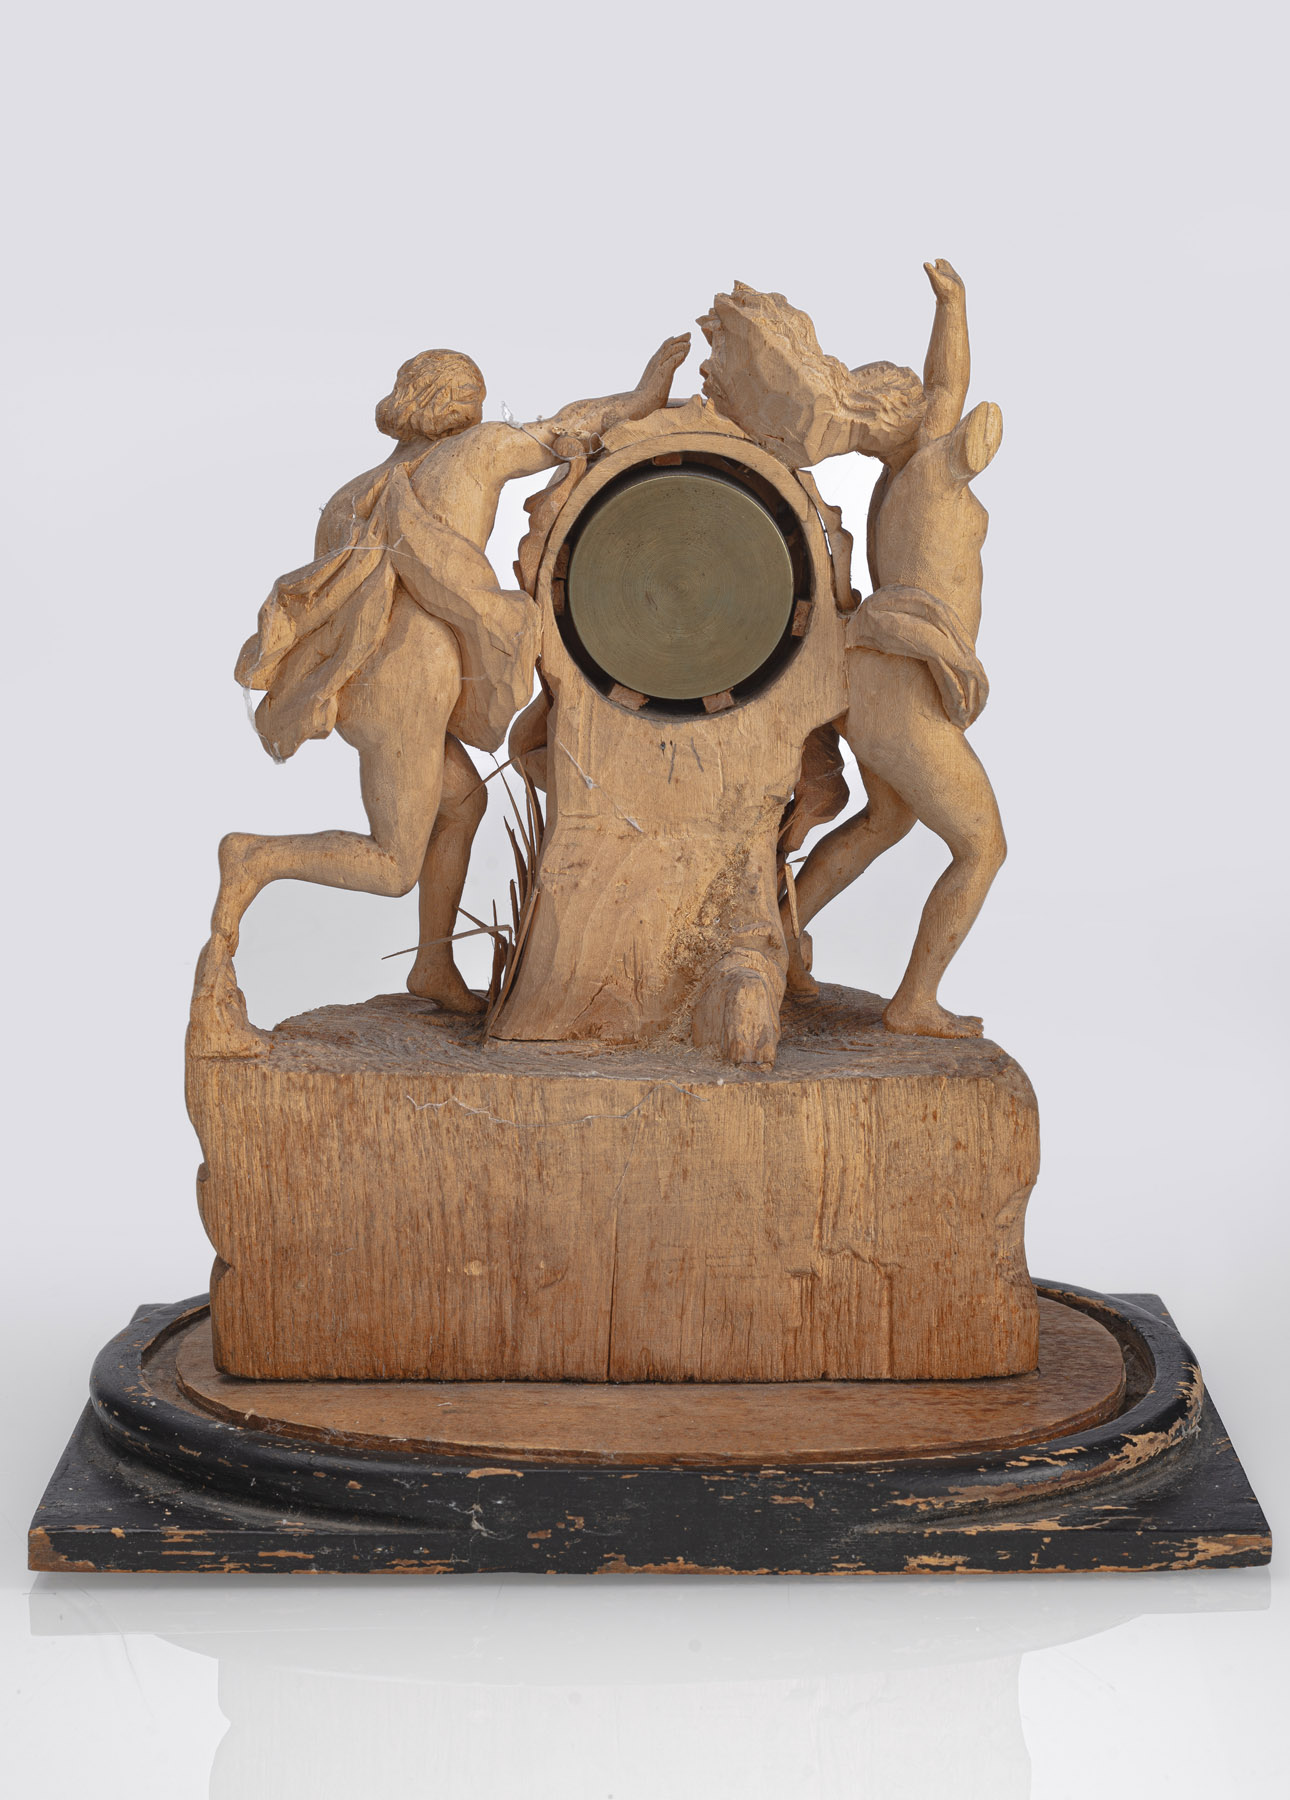 Pocket Watch Stand with Apollo, Daphne and Chronos - Image 2 of 3